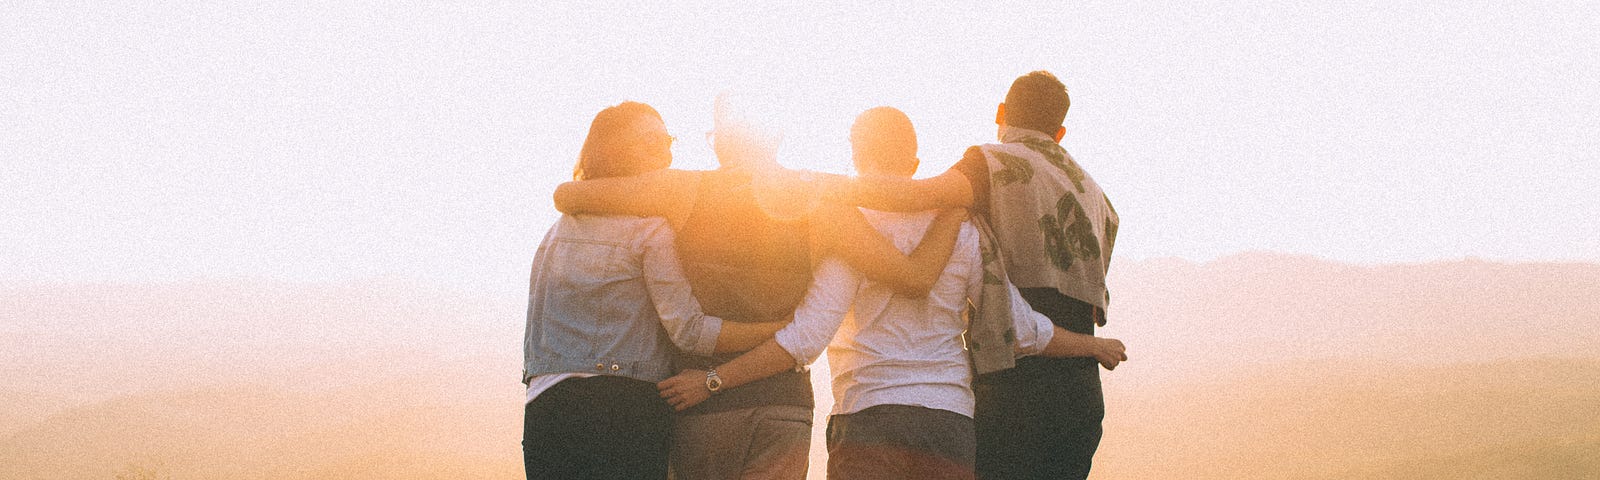 photo of four people standing with their arms around each other’s shoulders, looking away from the camera at rolling hills.